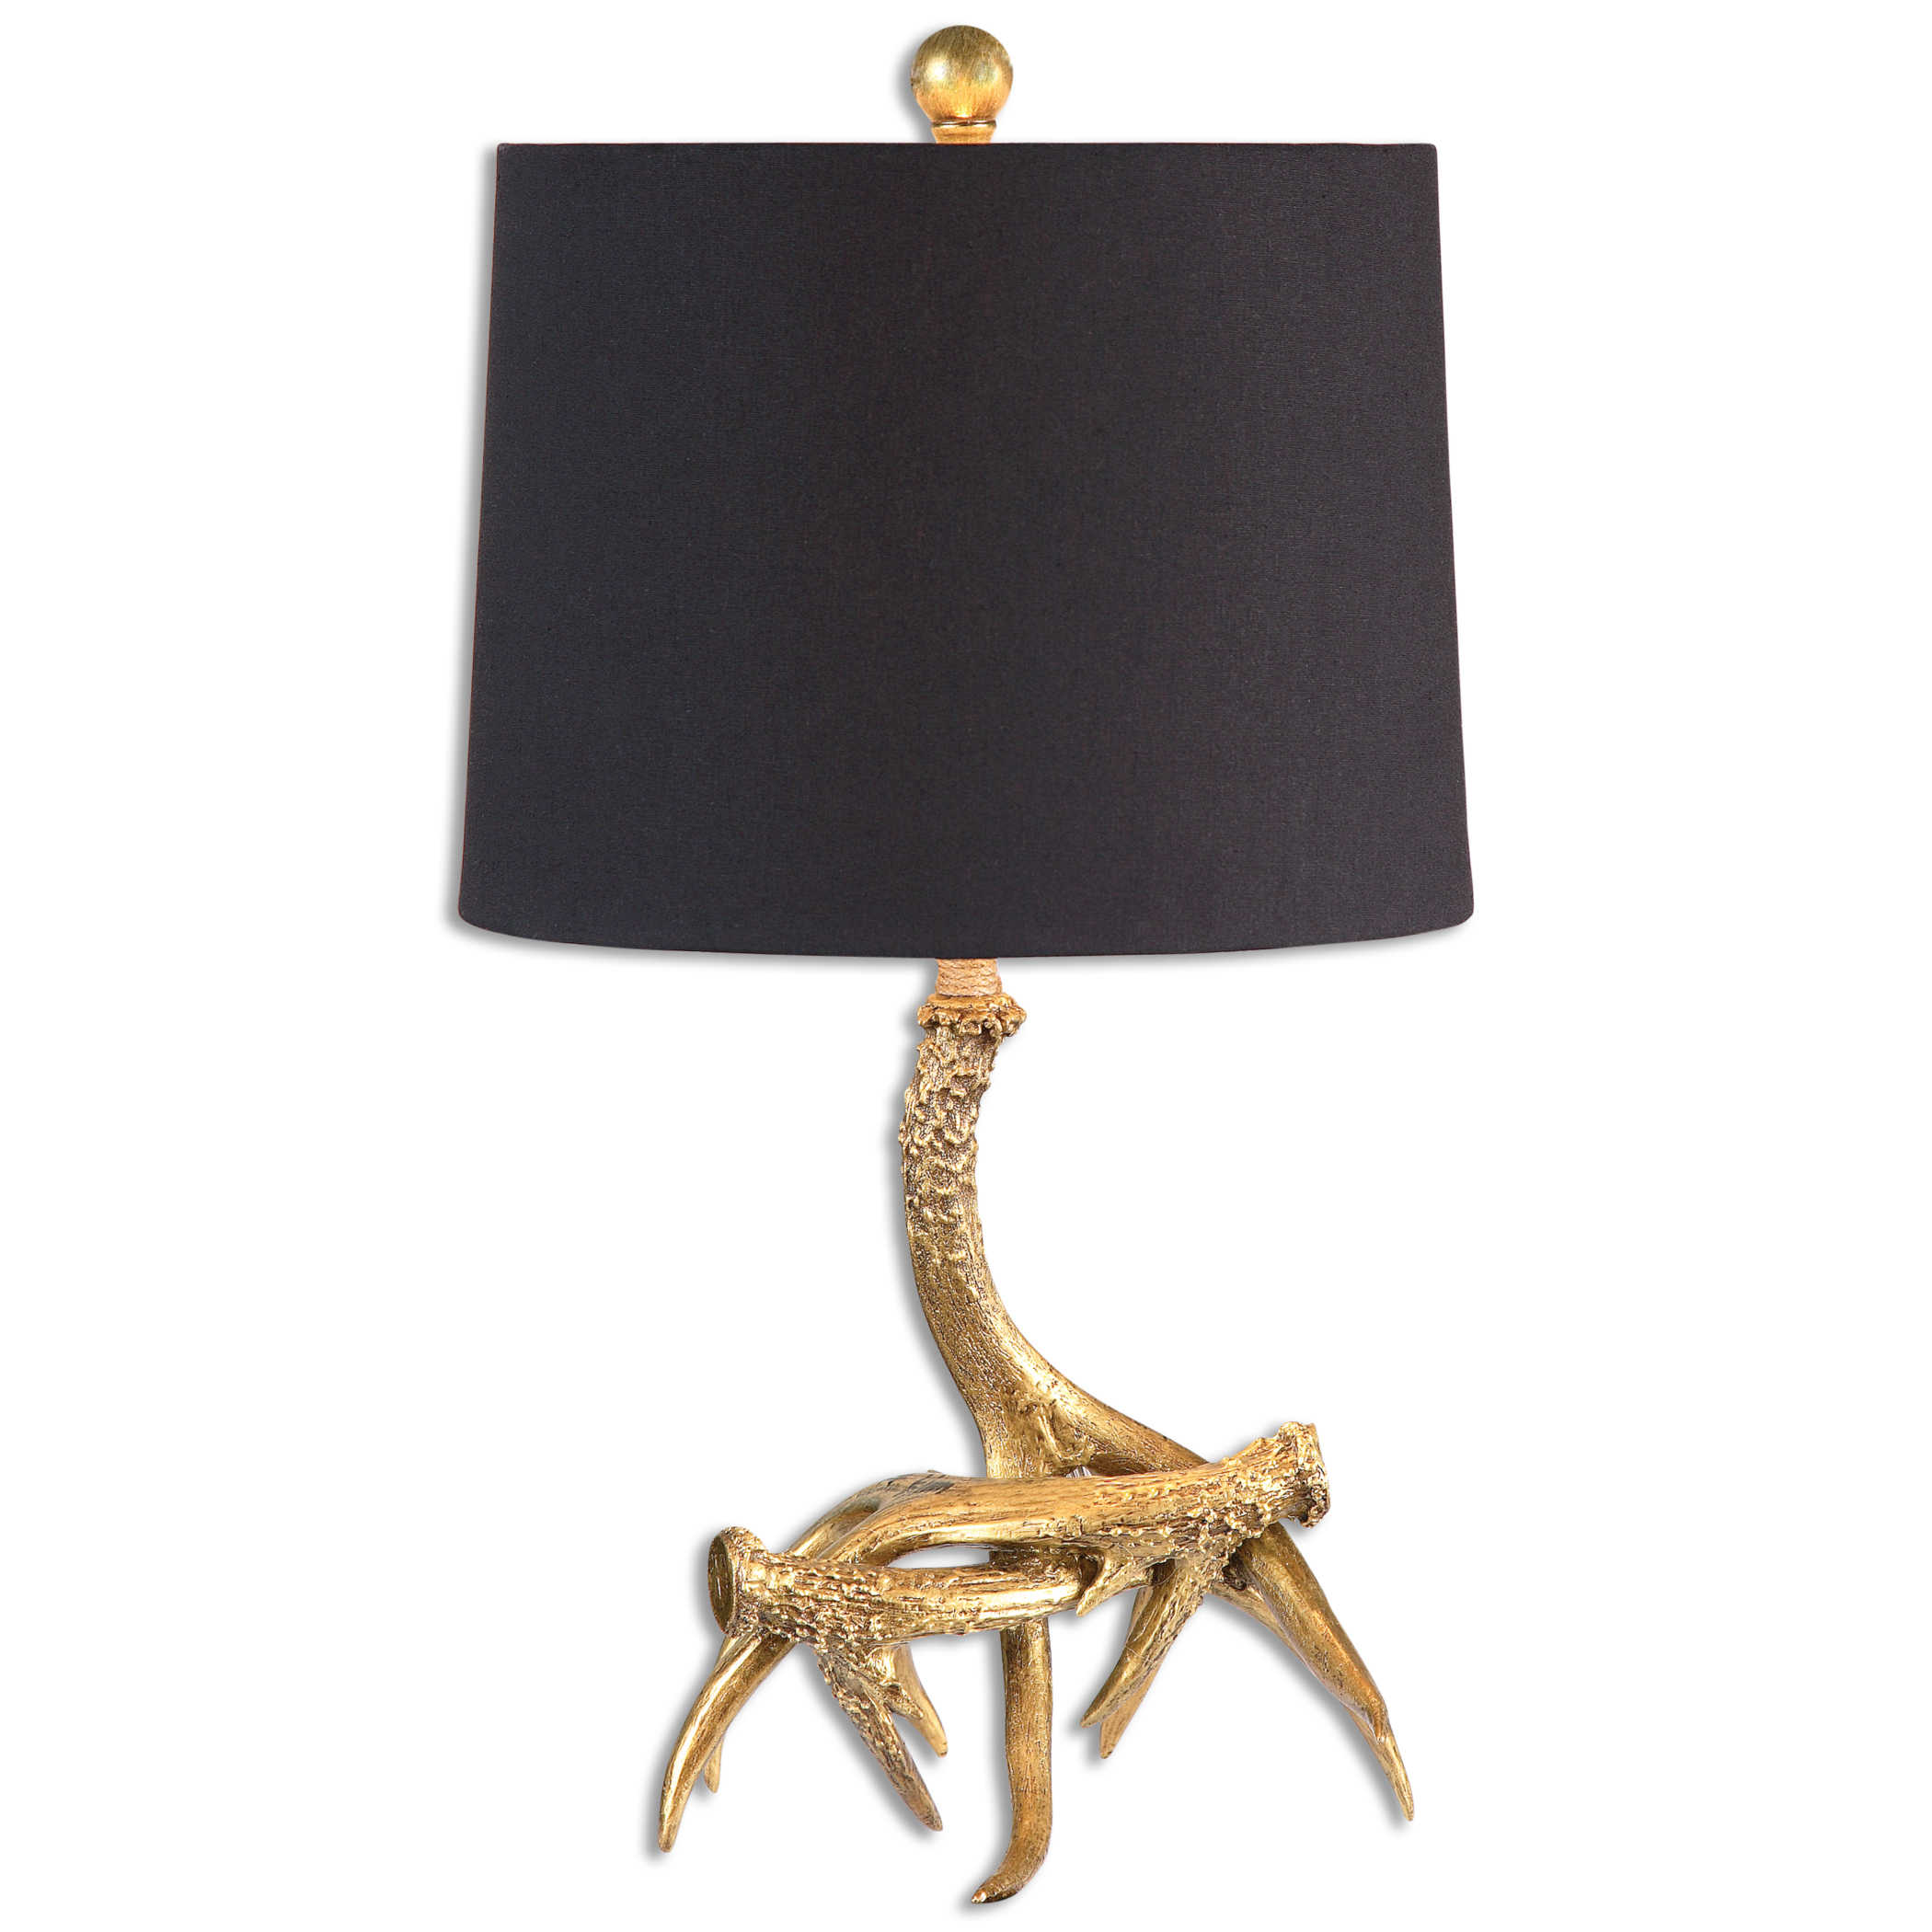 Golden Antlers Table Lamp Uttermost, Uttermost Xander Distressed Bronze Table Lamp